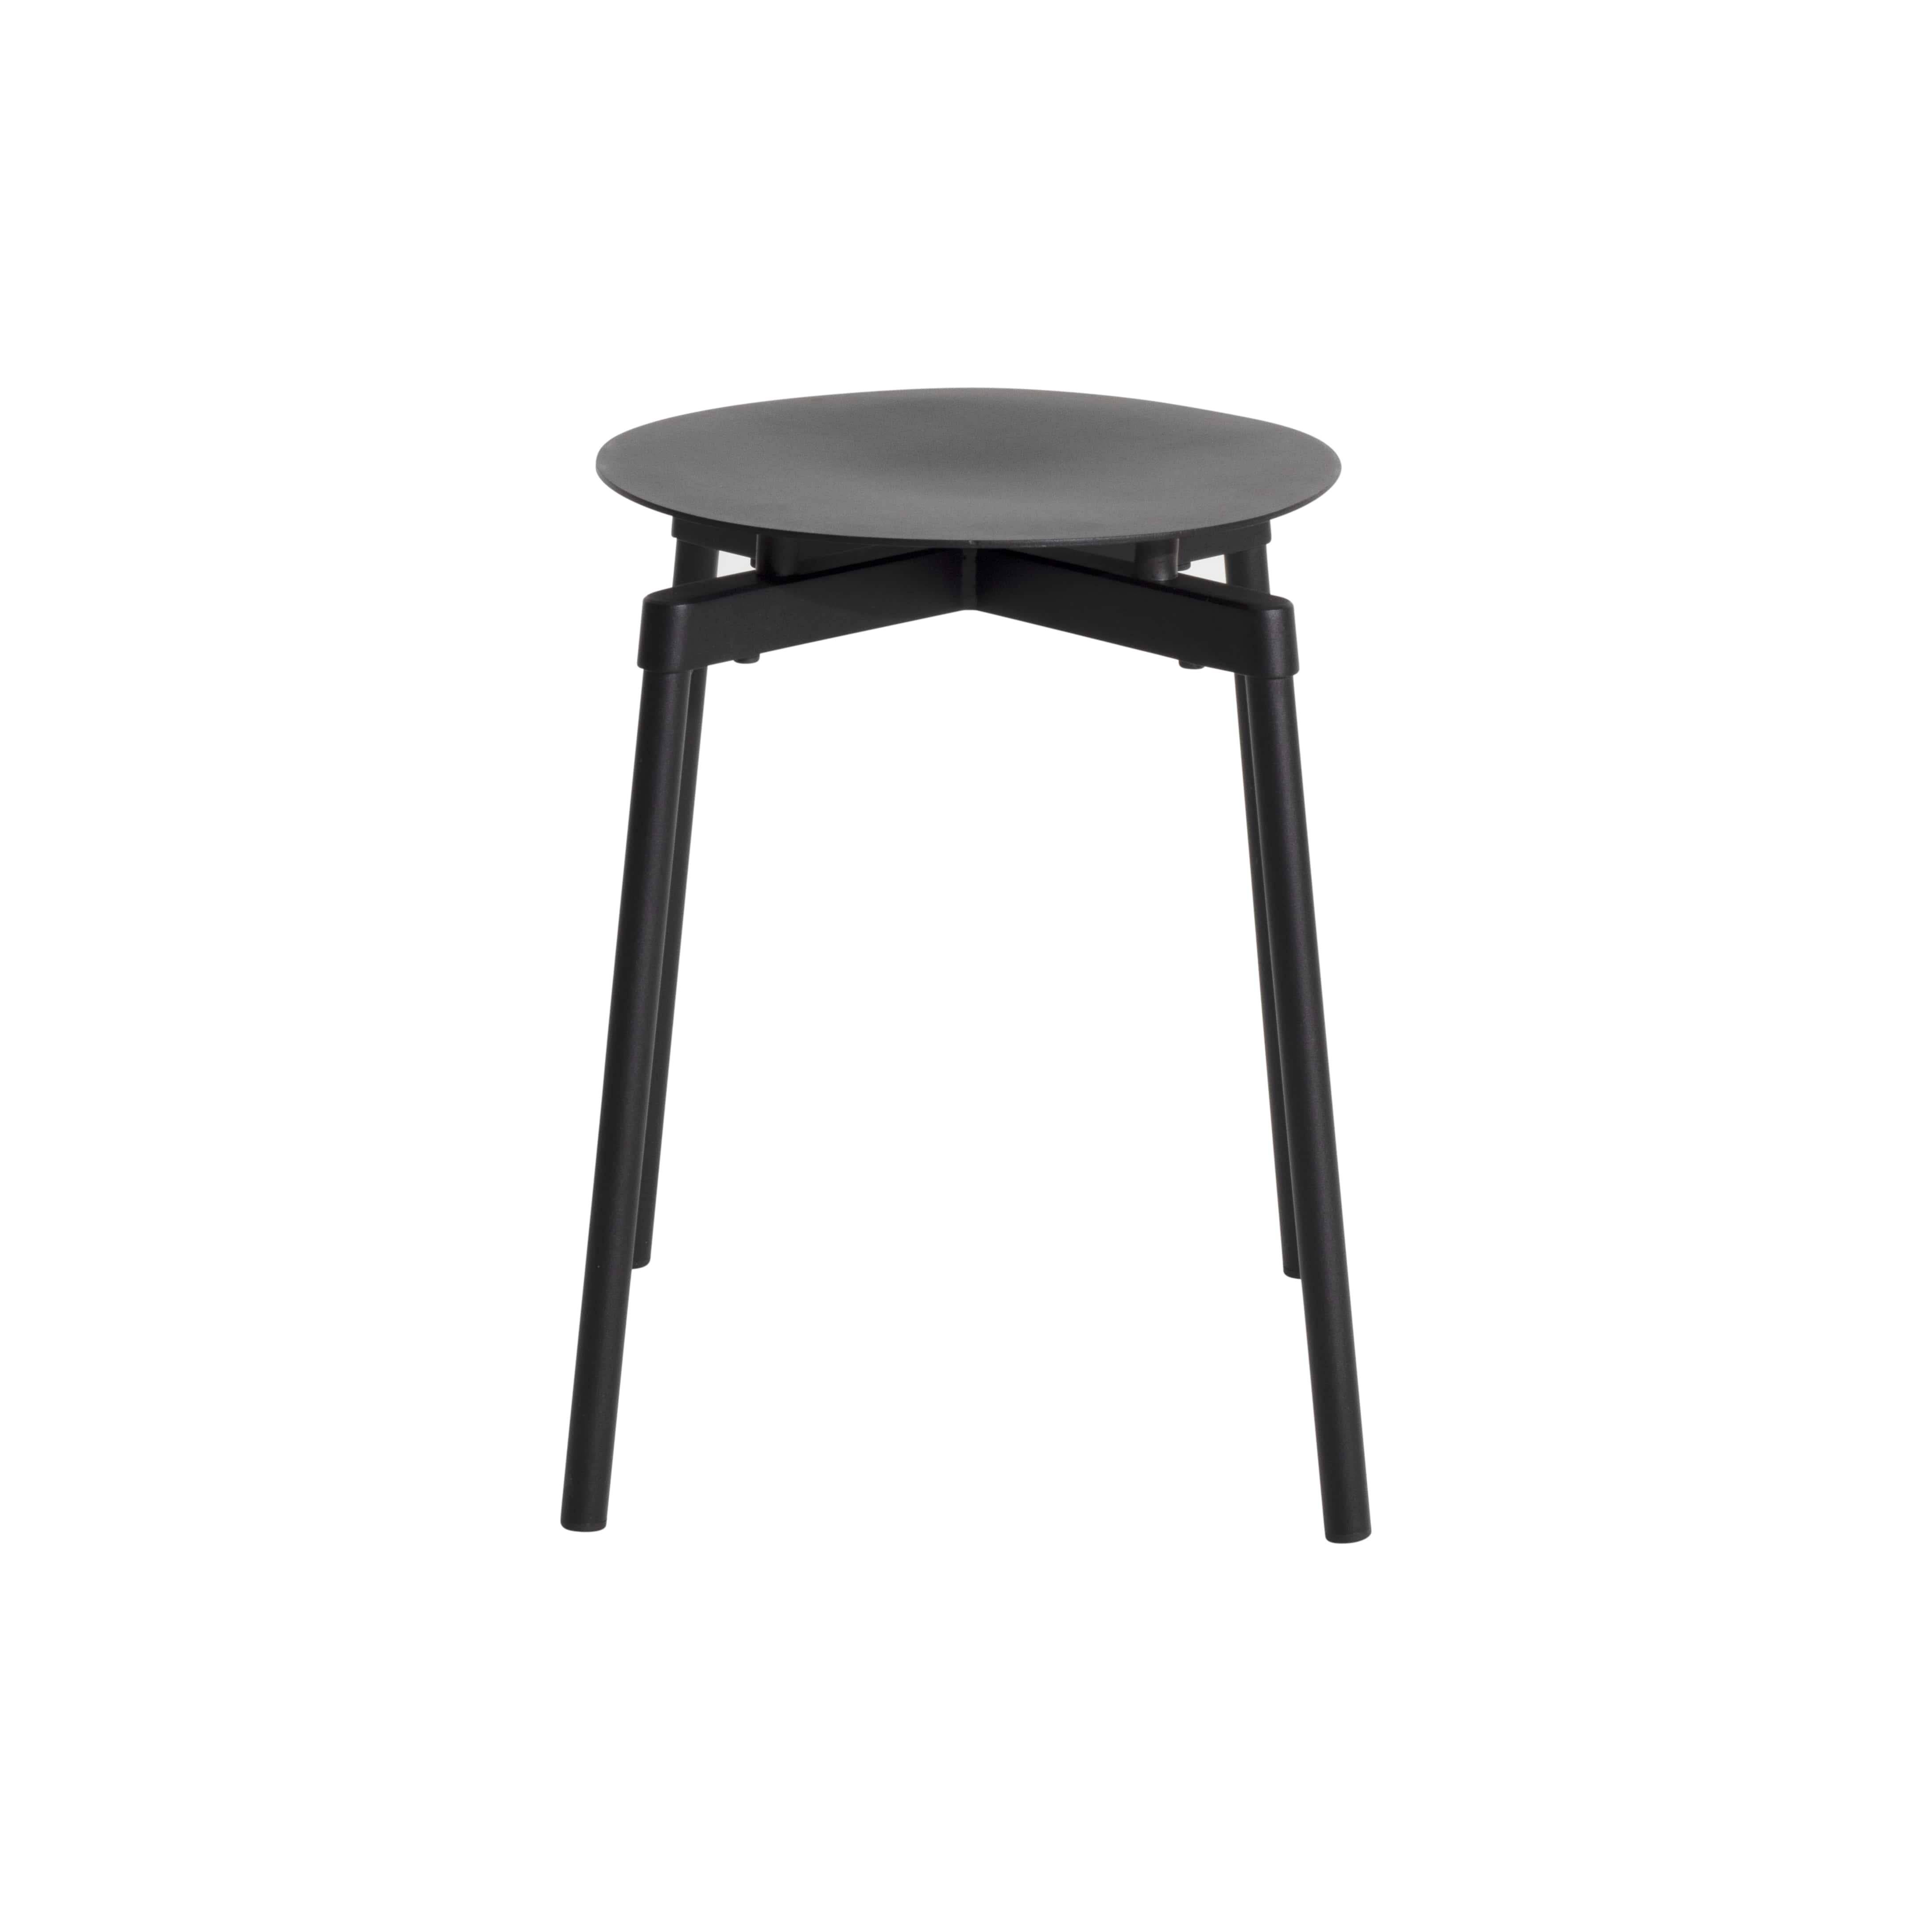 Petite Friture Fromme Stool in Black Aluminium by Tom Chung, 2020

The Fromme collection stands out by its pure line and compact design. Absorbers placed under the seating gives a soft and very comfortable flexibility to seats. Made from